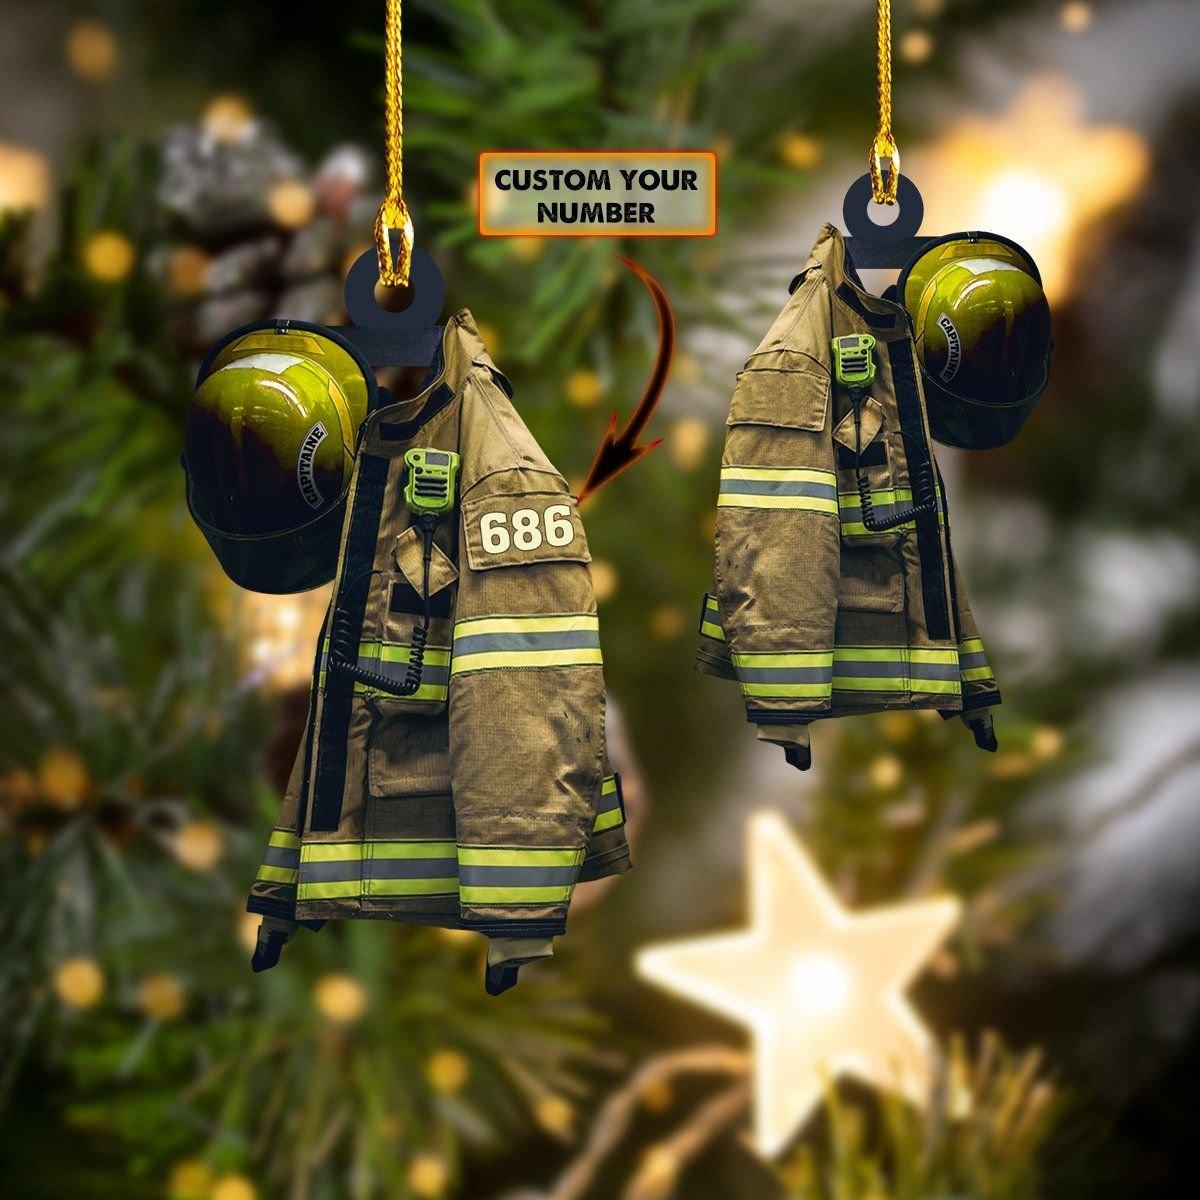 giftngon - Personalized Firefighter Capitaine YELLOW HELMET | Christmas Custom Shaped Ornament | Custom Number